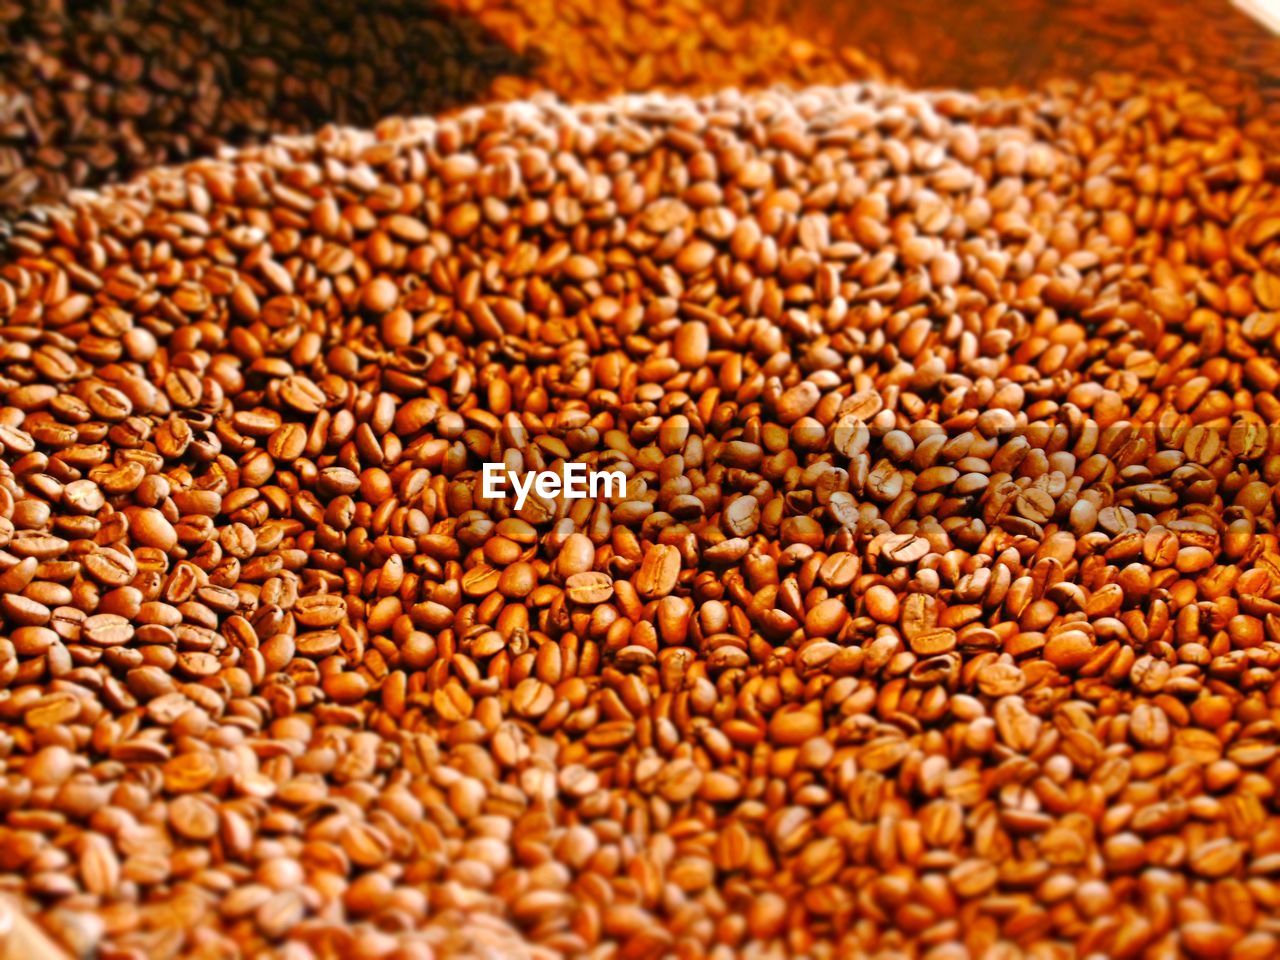 CLOSE-UP OF ROASTED BEANS